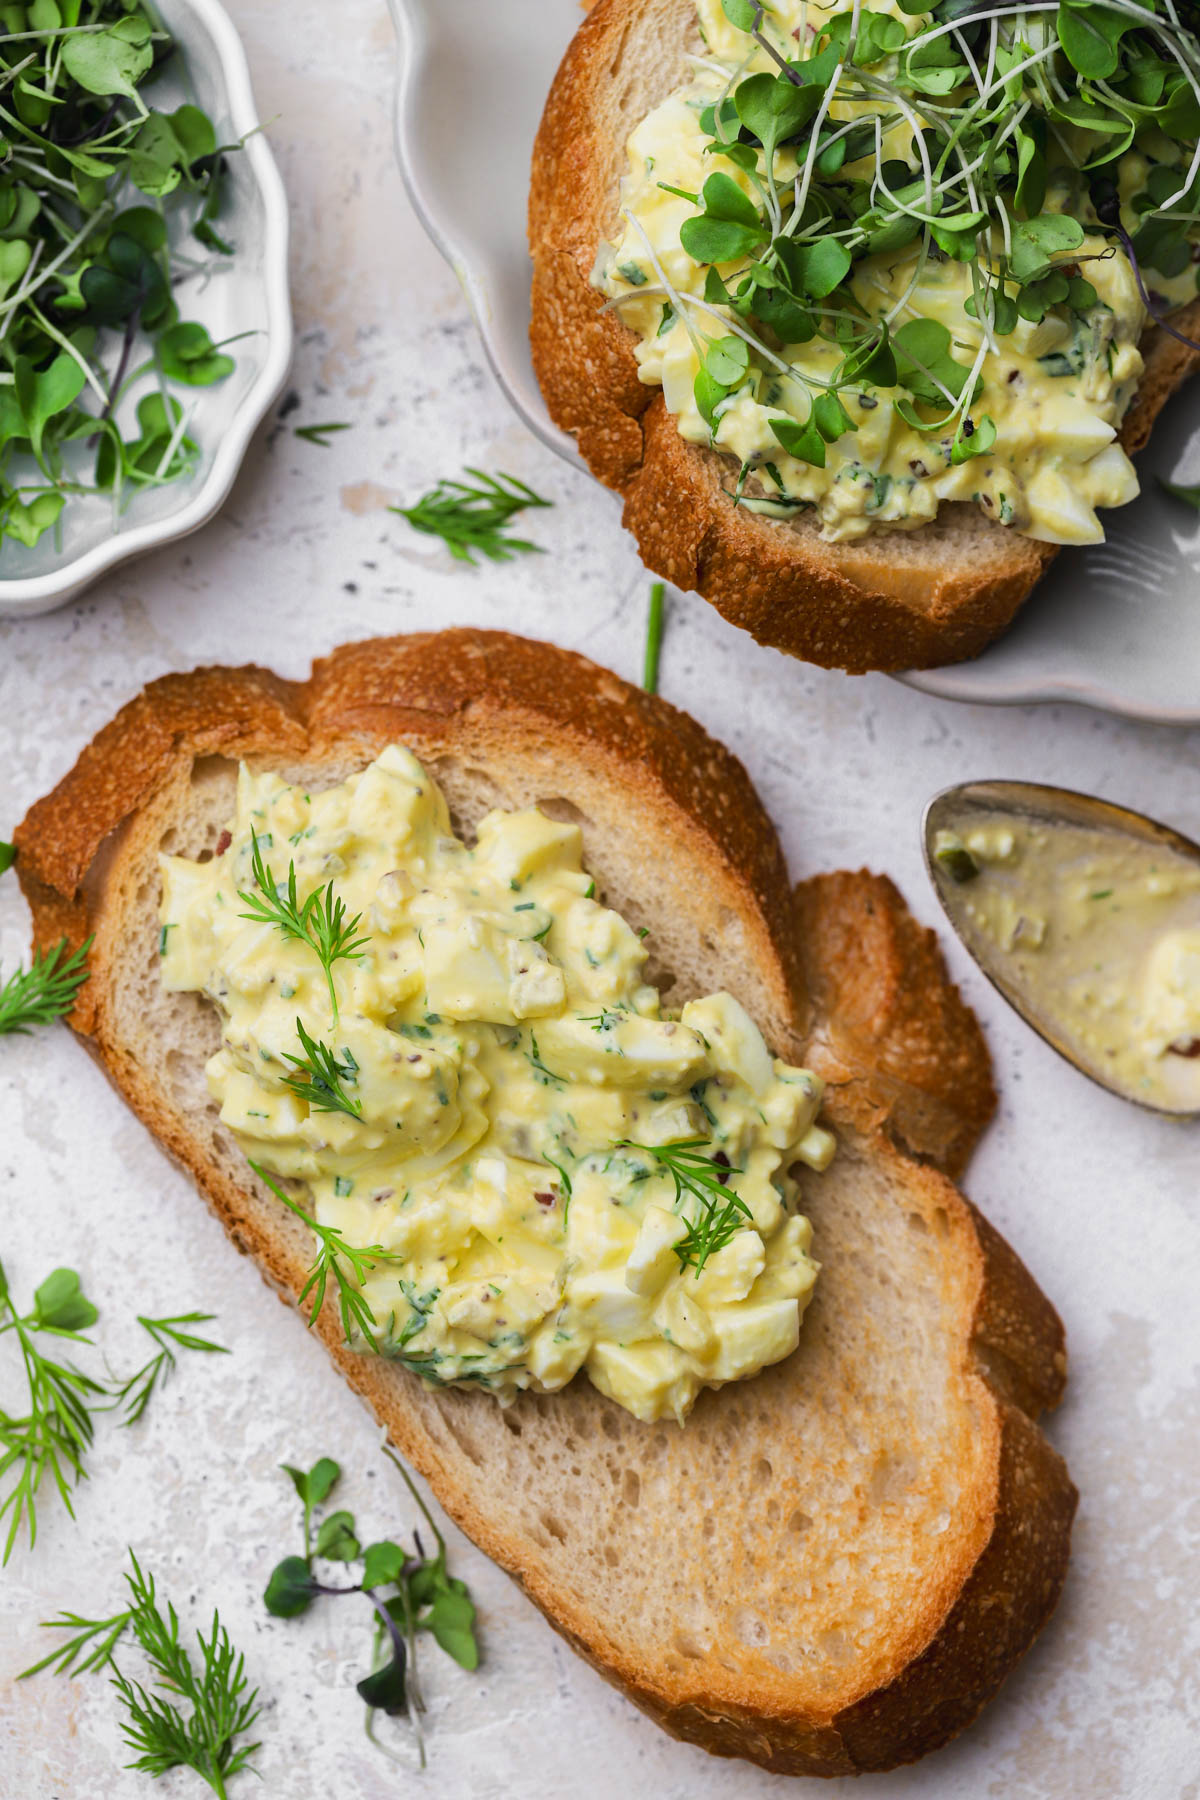 Egg salad with fresh herbs, dill pickles, dijon and mayo.  